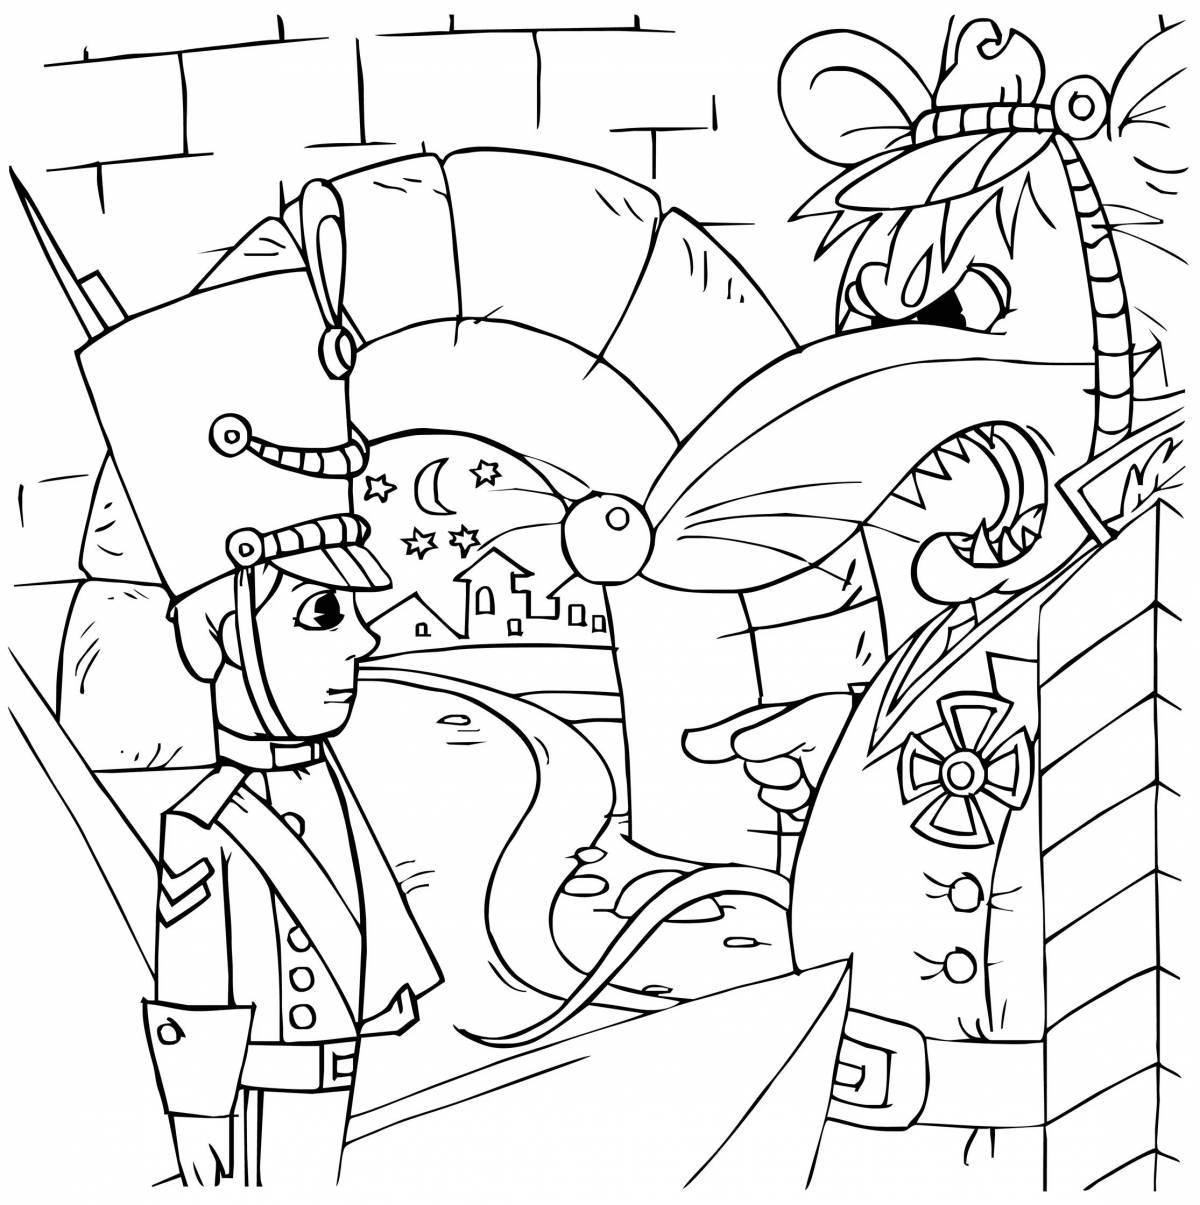 Colorful mouse king coloring book